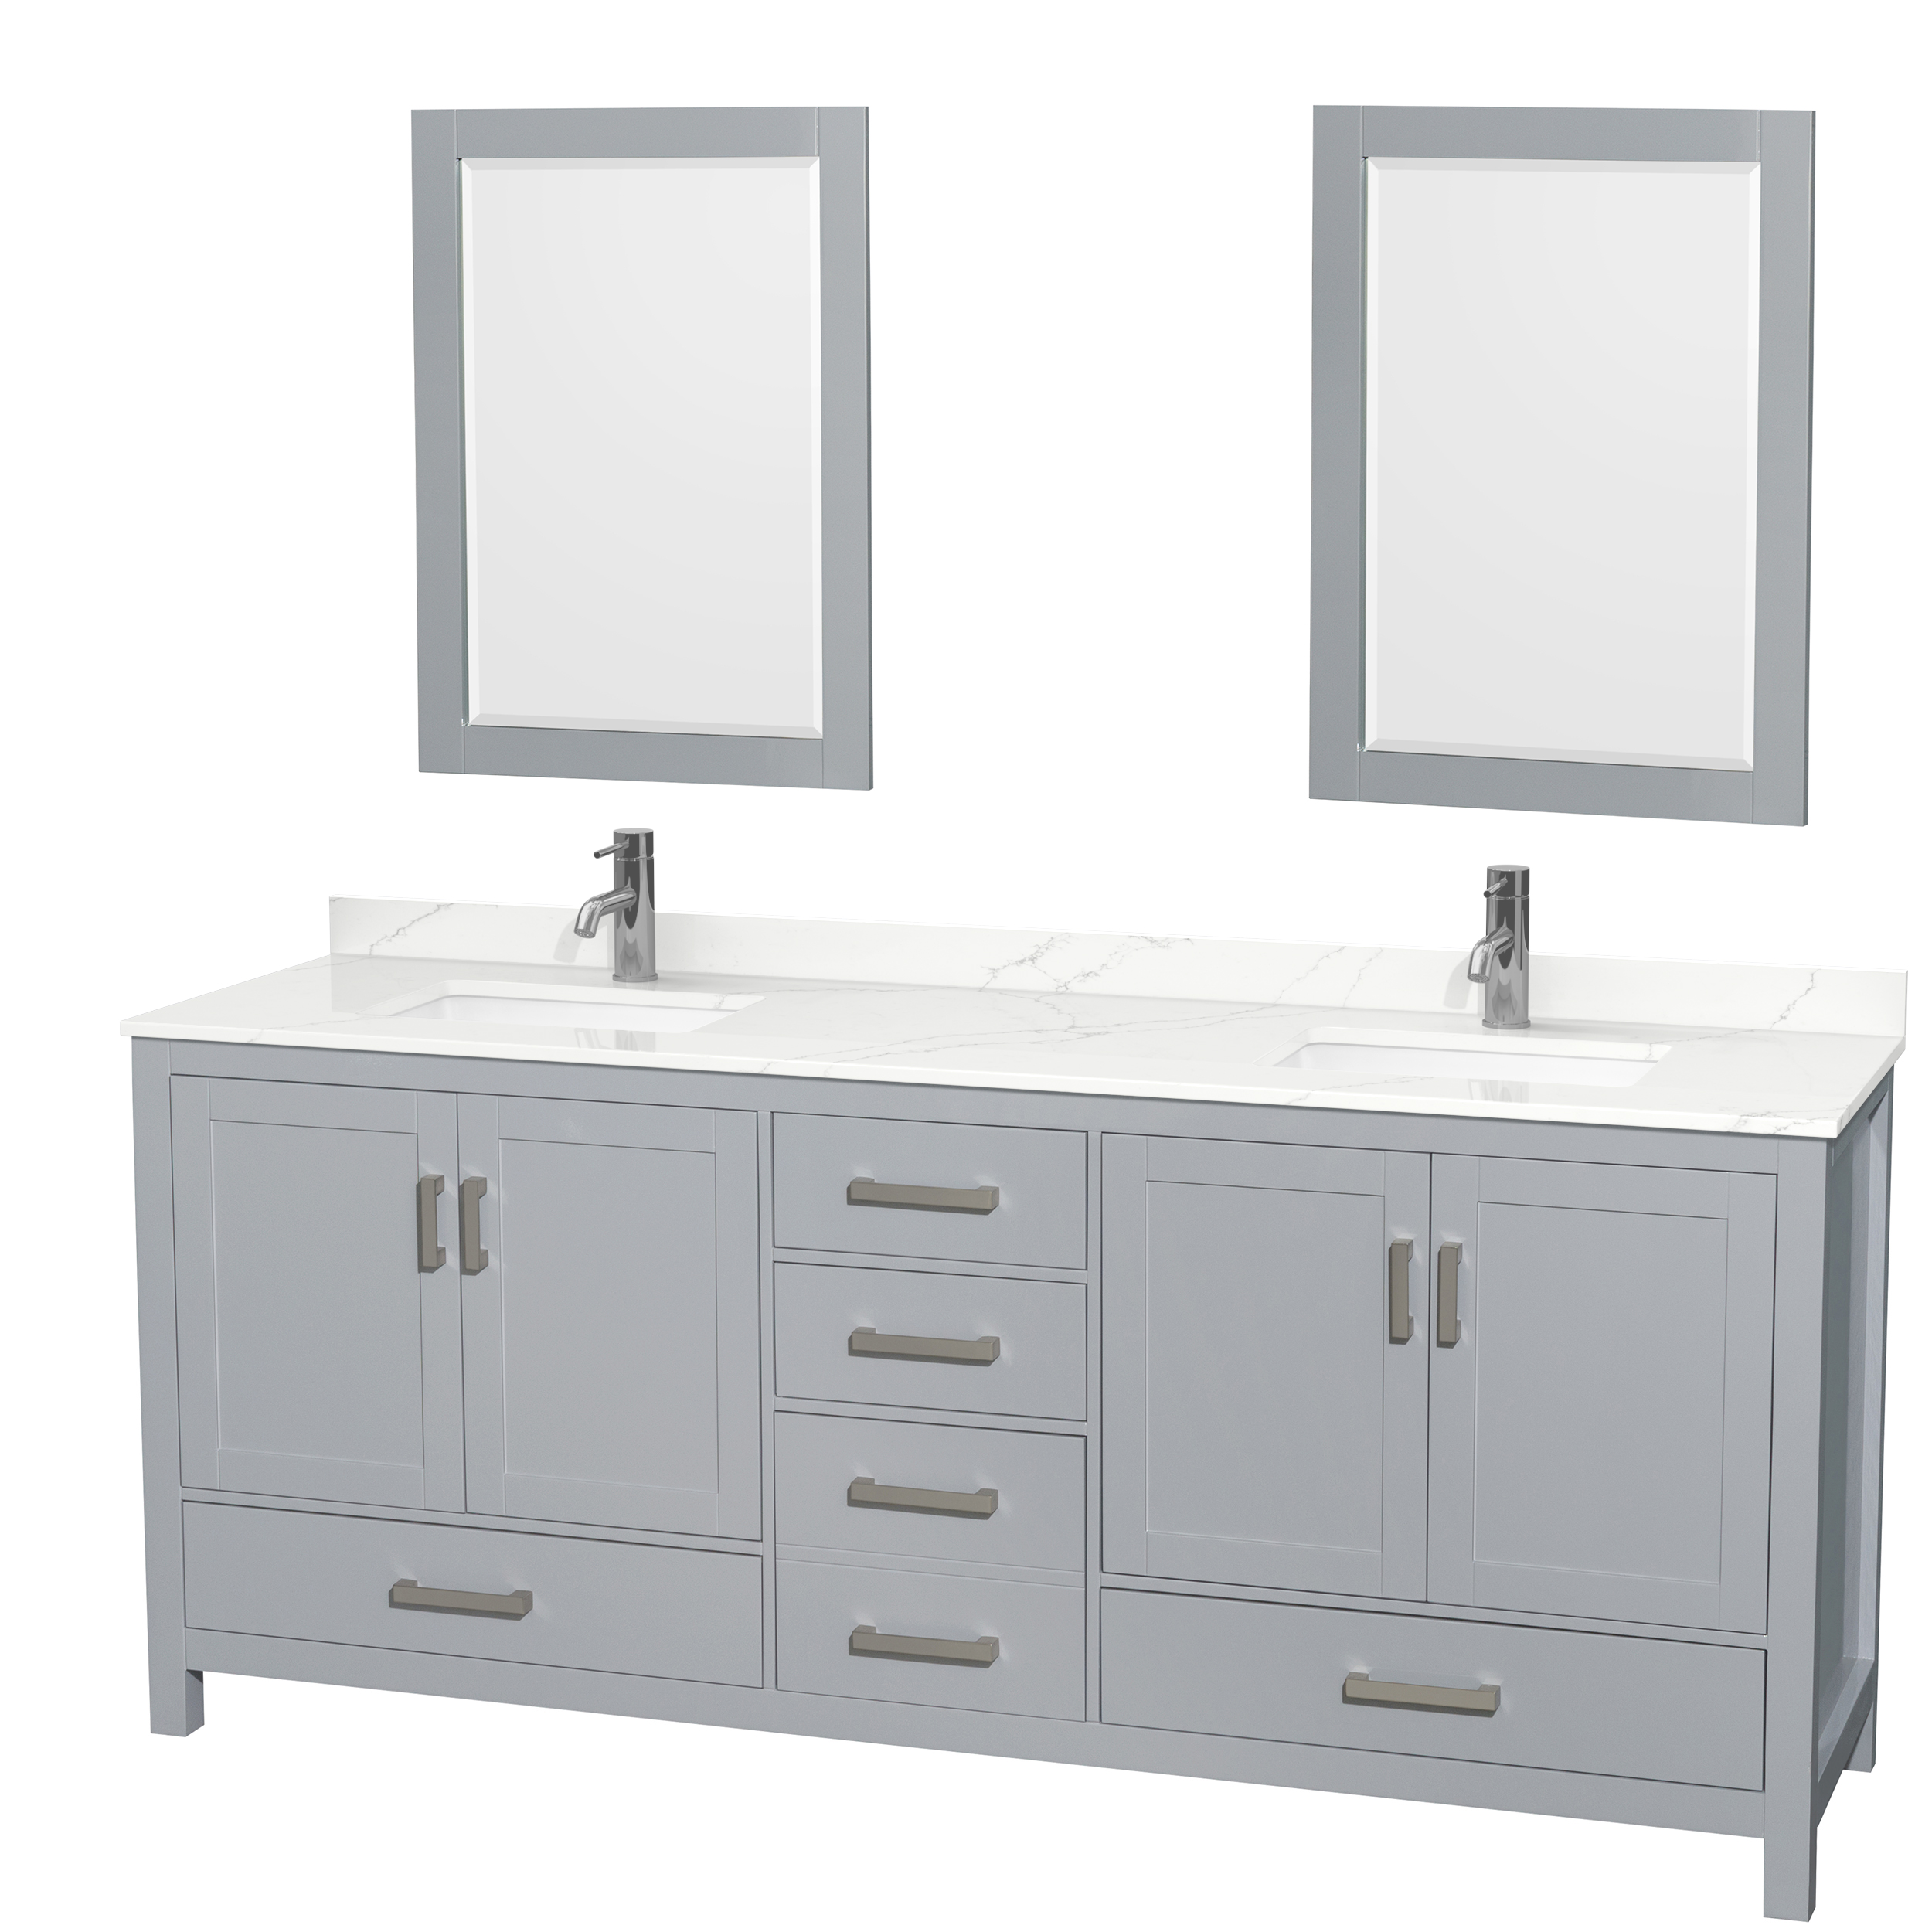 sheffield 80" double bathroom vanity by wyndham collection - gray